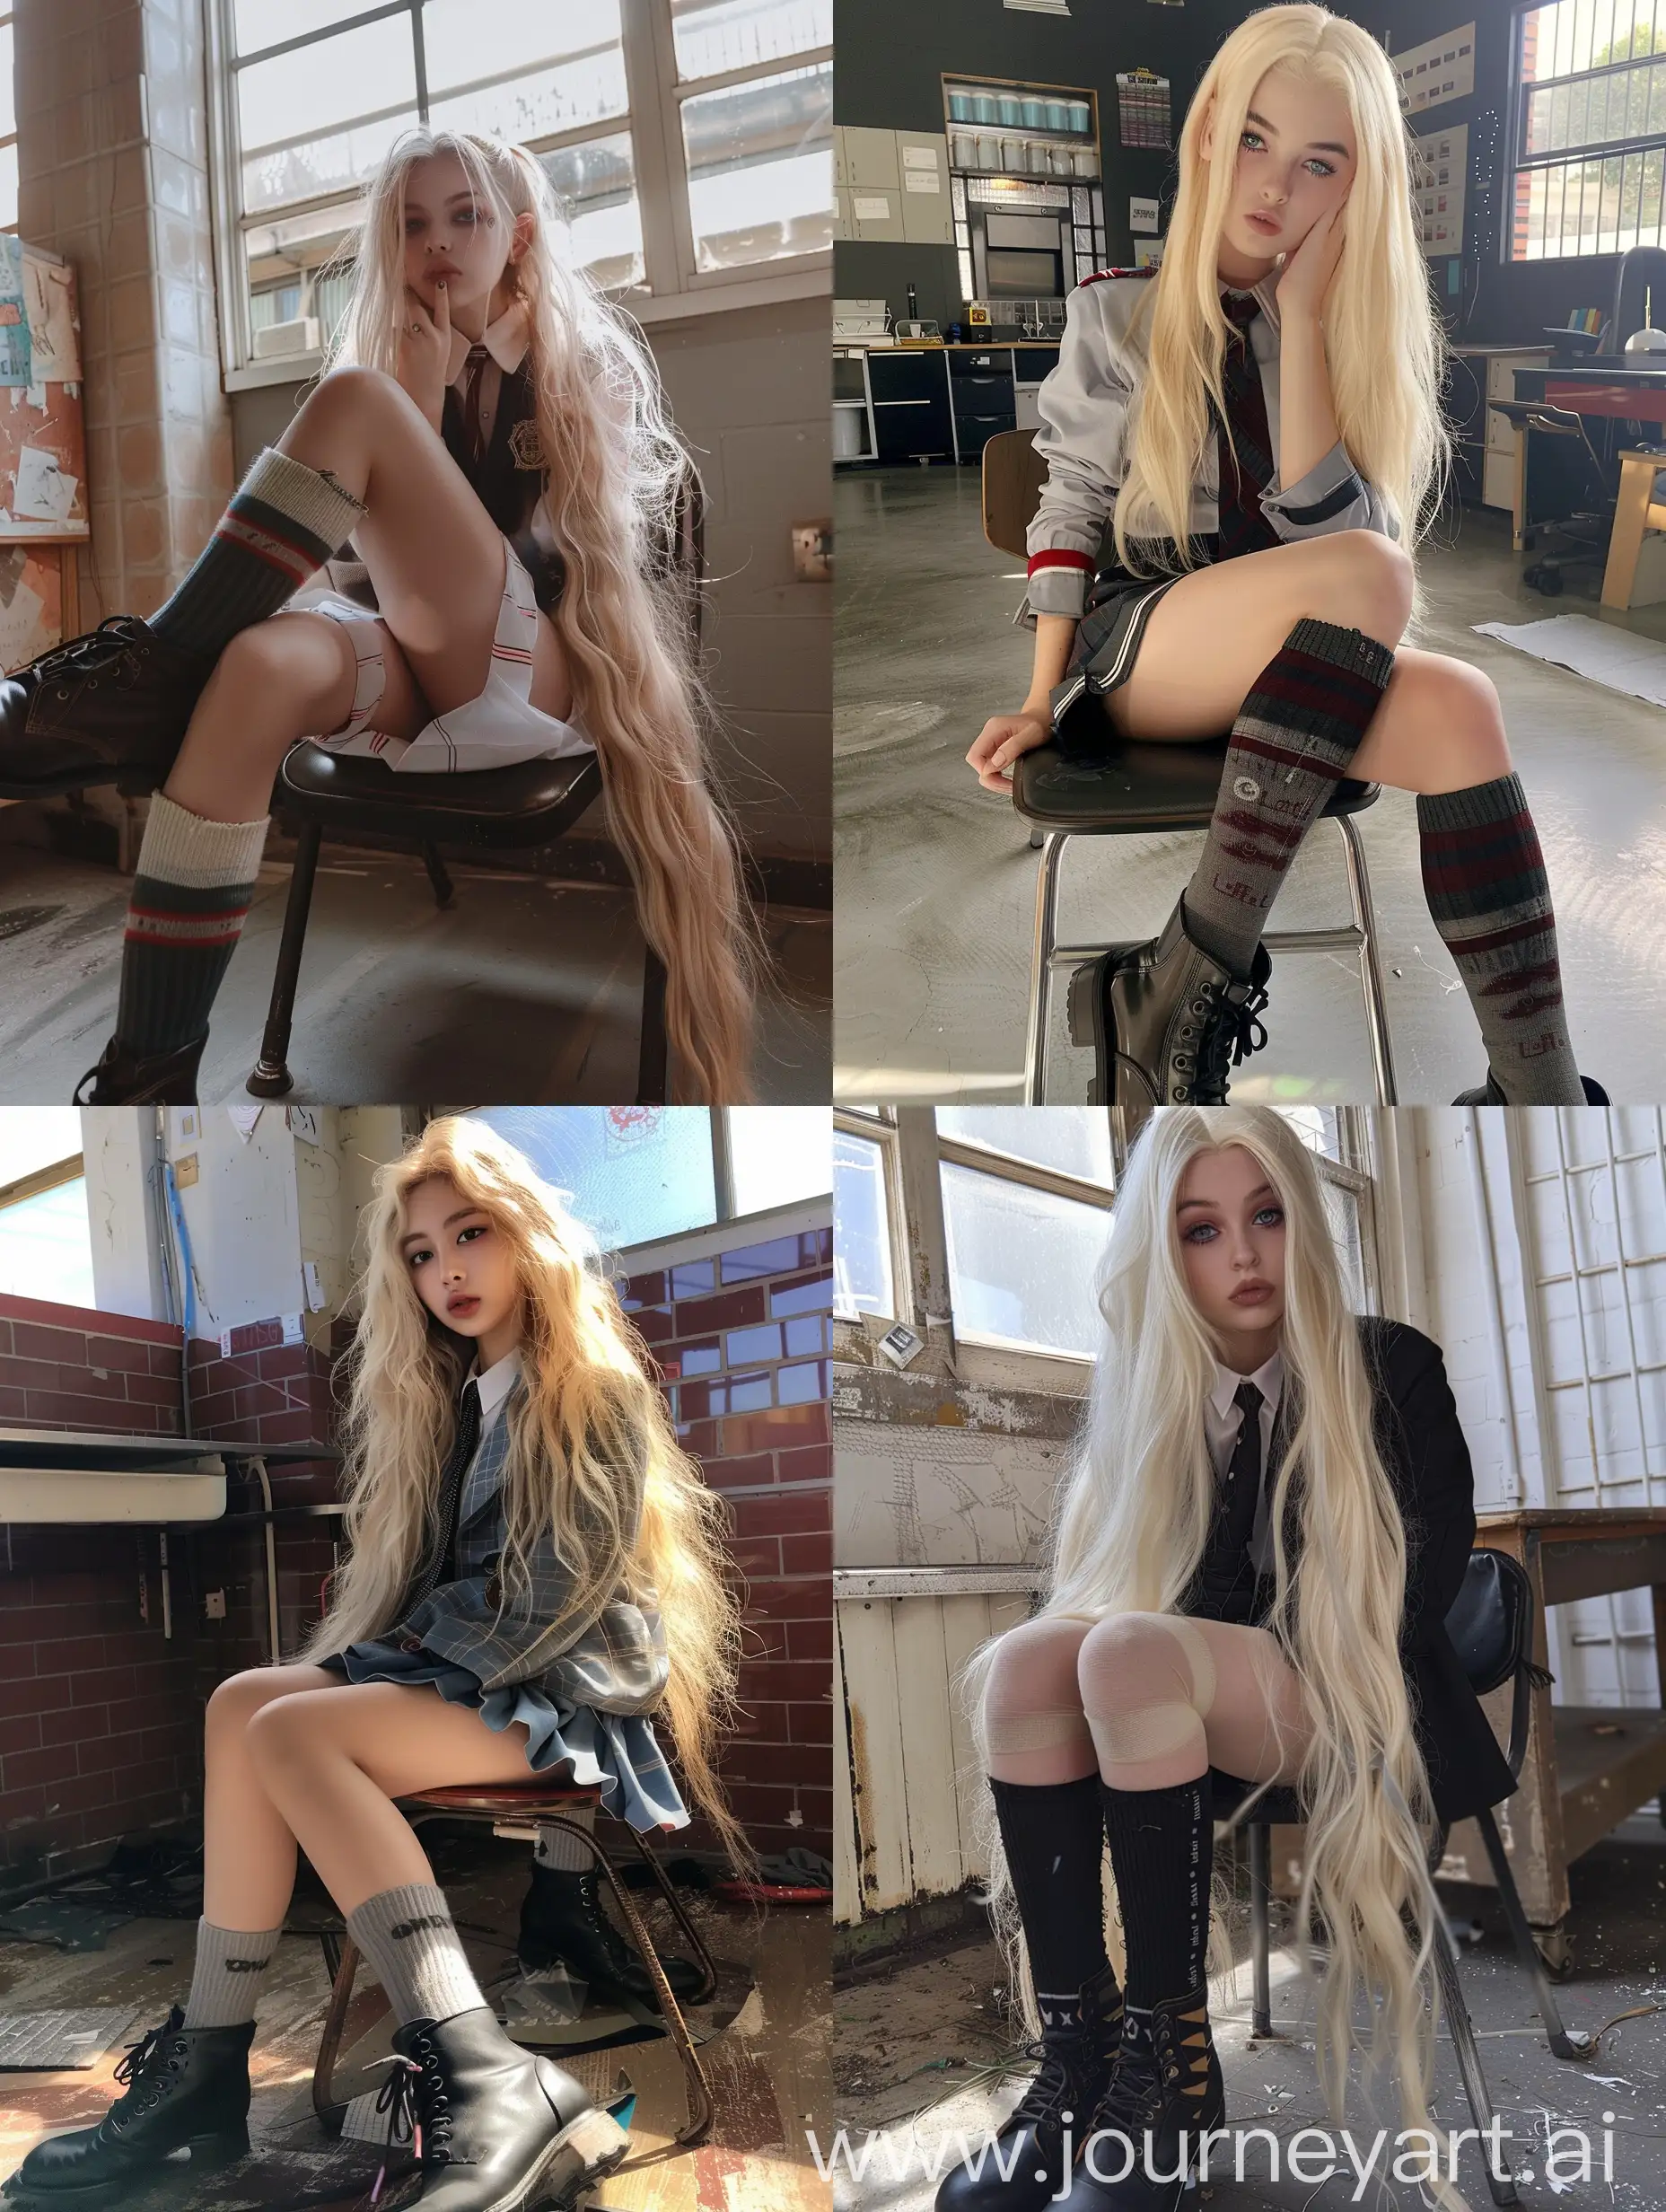 1 girl, long blond hair ,18  years  old ,influencer ,  beauty,  in  the  school  ,  school  uniform  ,  makeup   ,   sitting  on  chair ,     socks  and  boots   , no  effect ,   selfie  ,  iphone  selfie  ,    no  filters   , iphone  photo  ,  natu